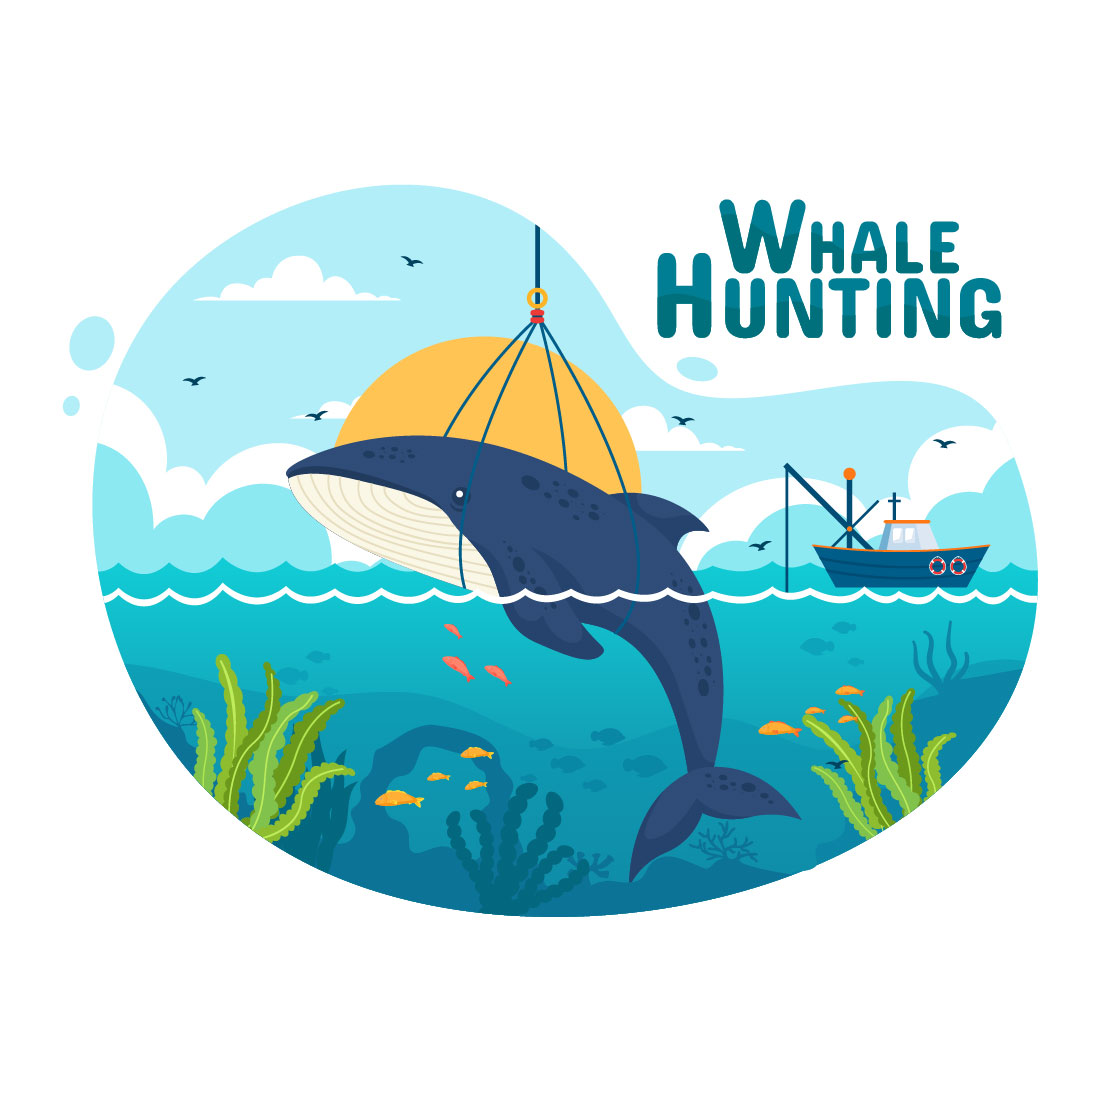 10 Whale Hunting Illustration cover image.